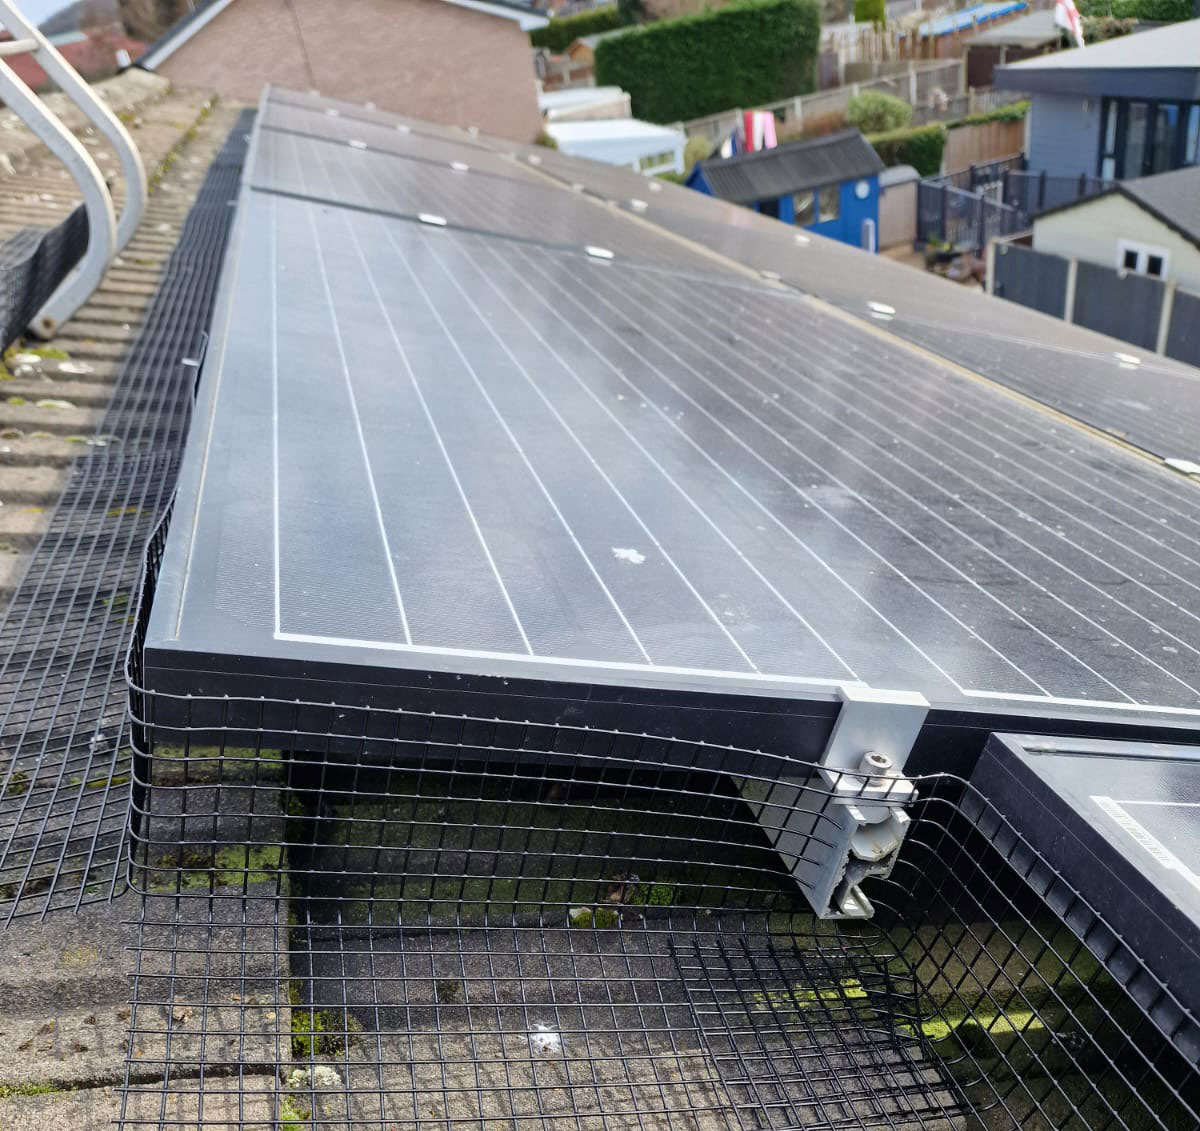 Protecting+Solar+Panels+from+Pigeons+in+Stapleford